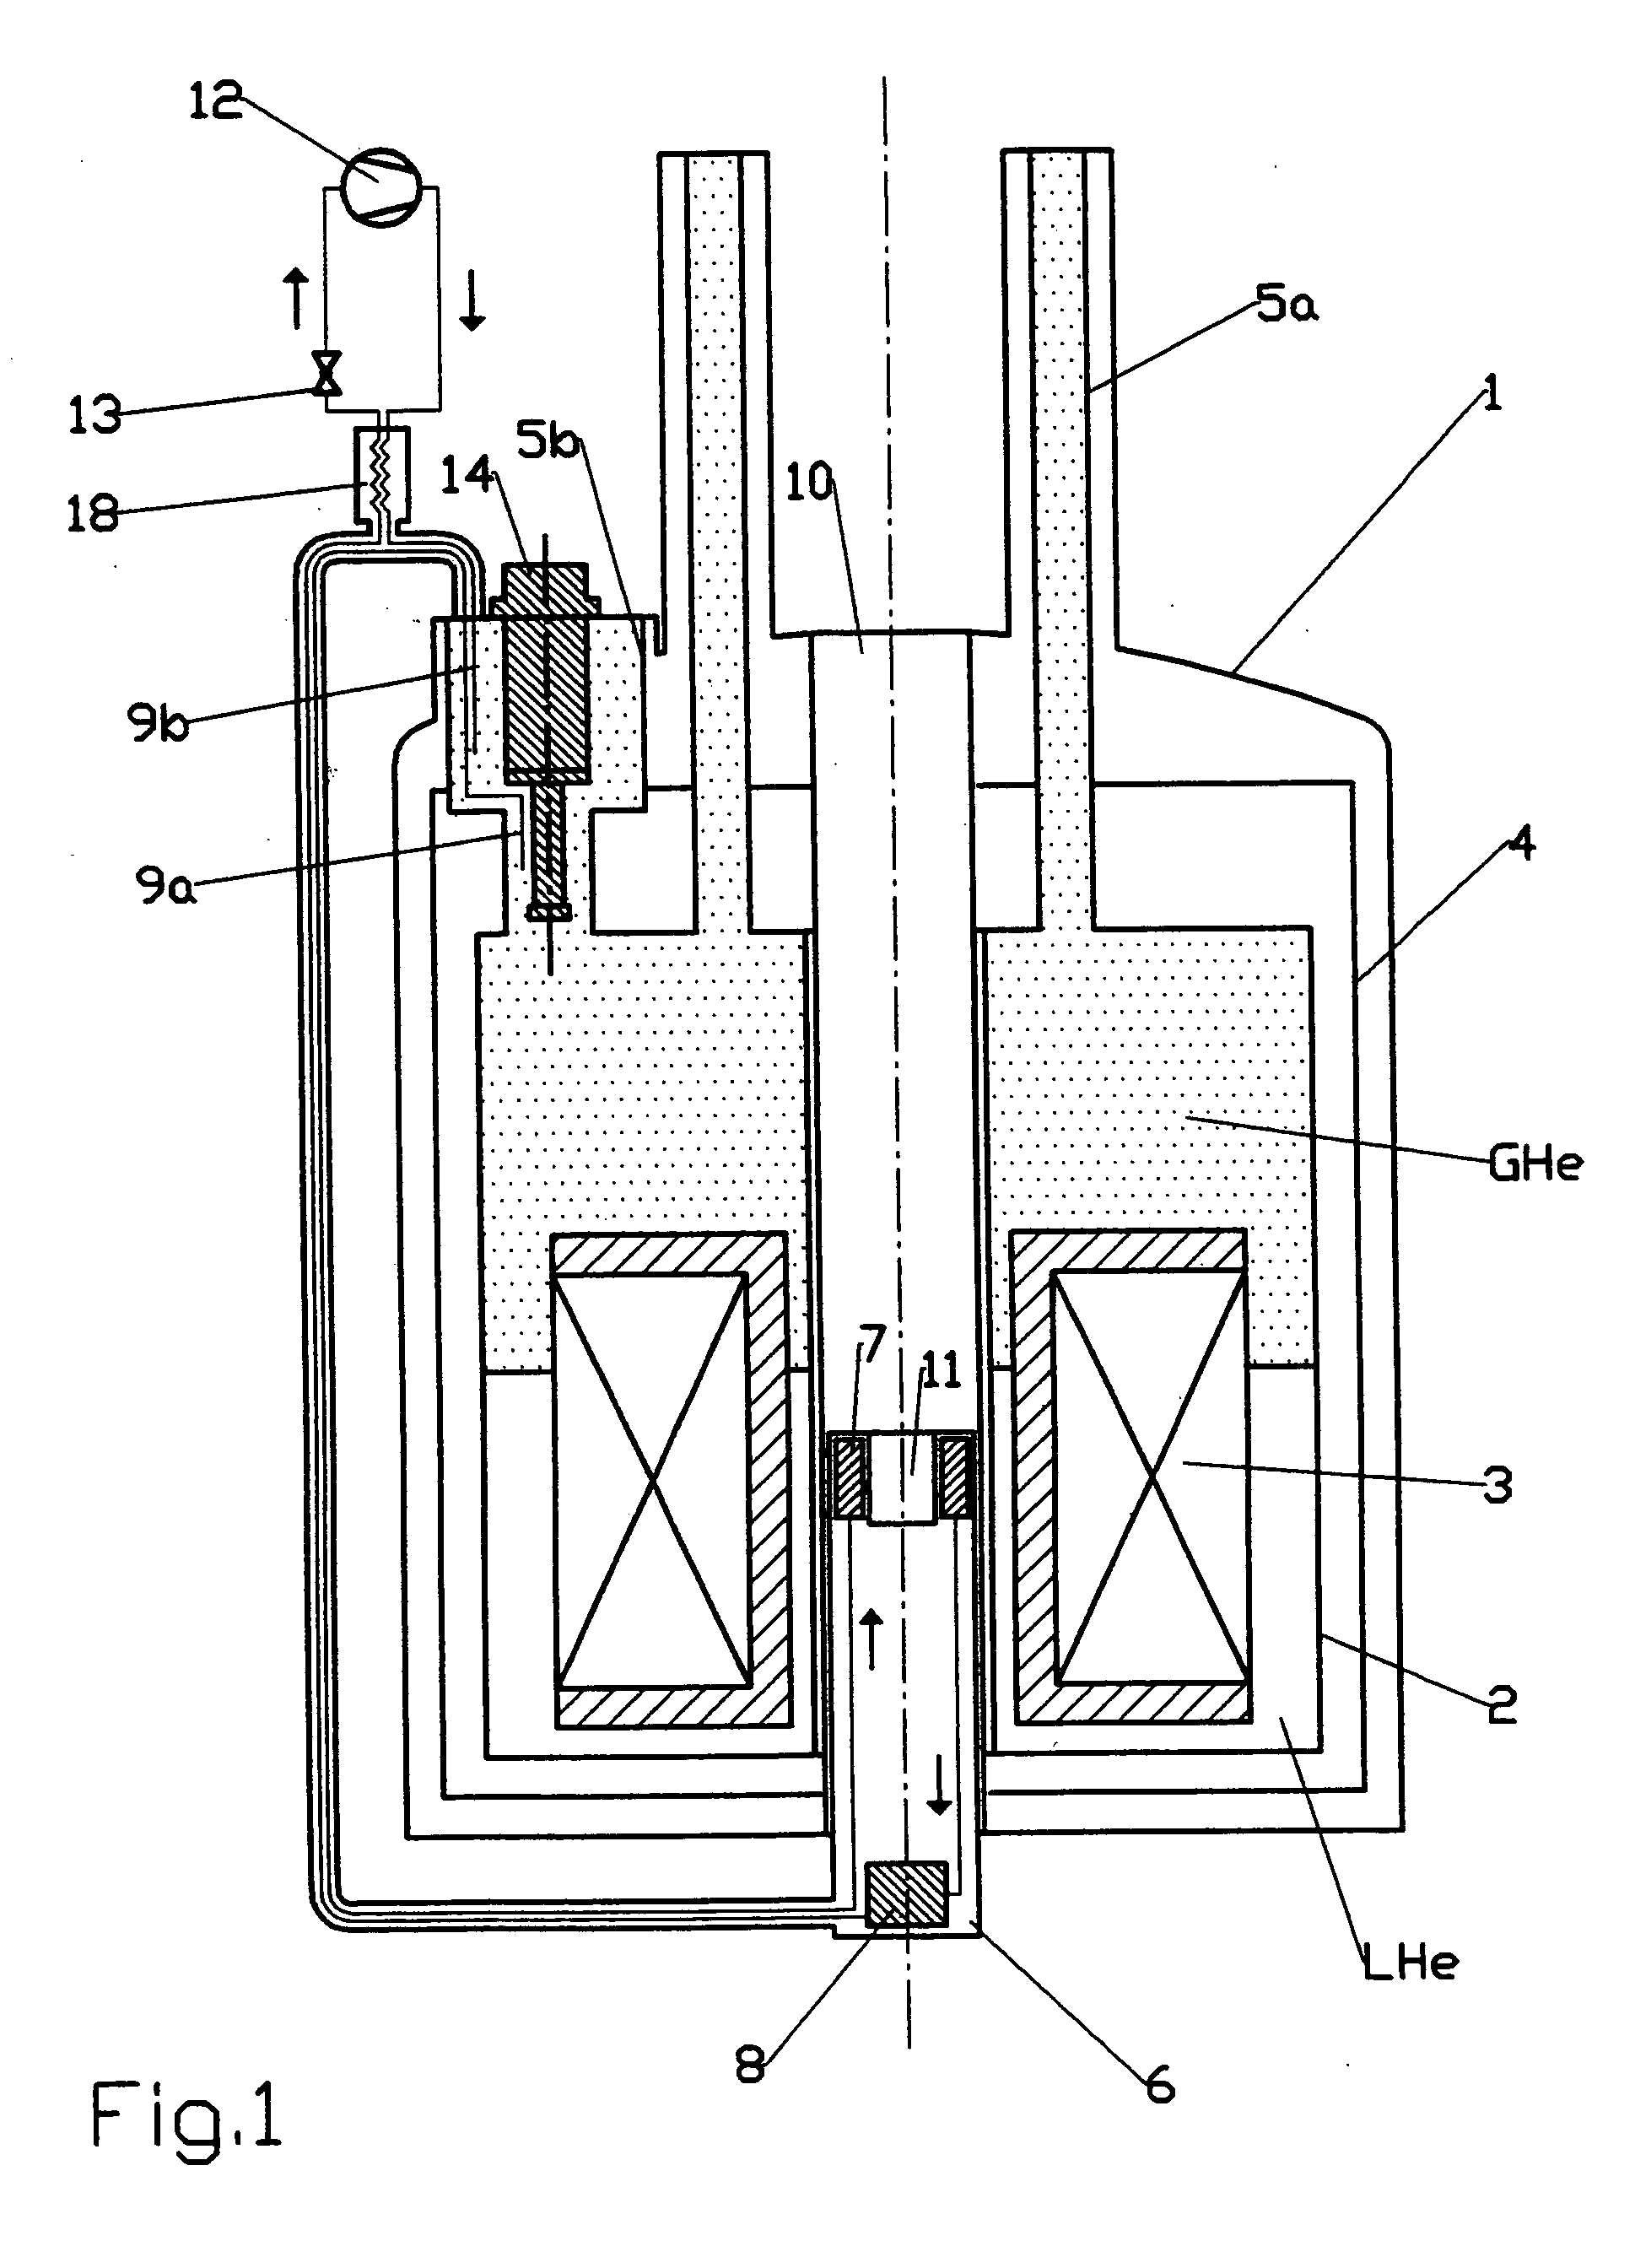 NMR spectrometer with common refrigerator for cooling an NMR probe head and cryostat